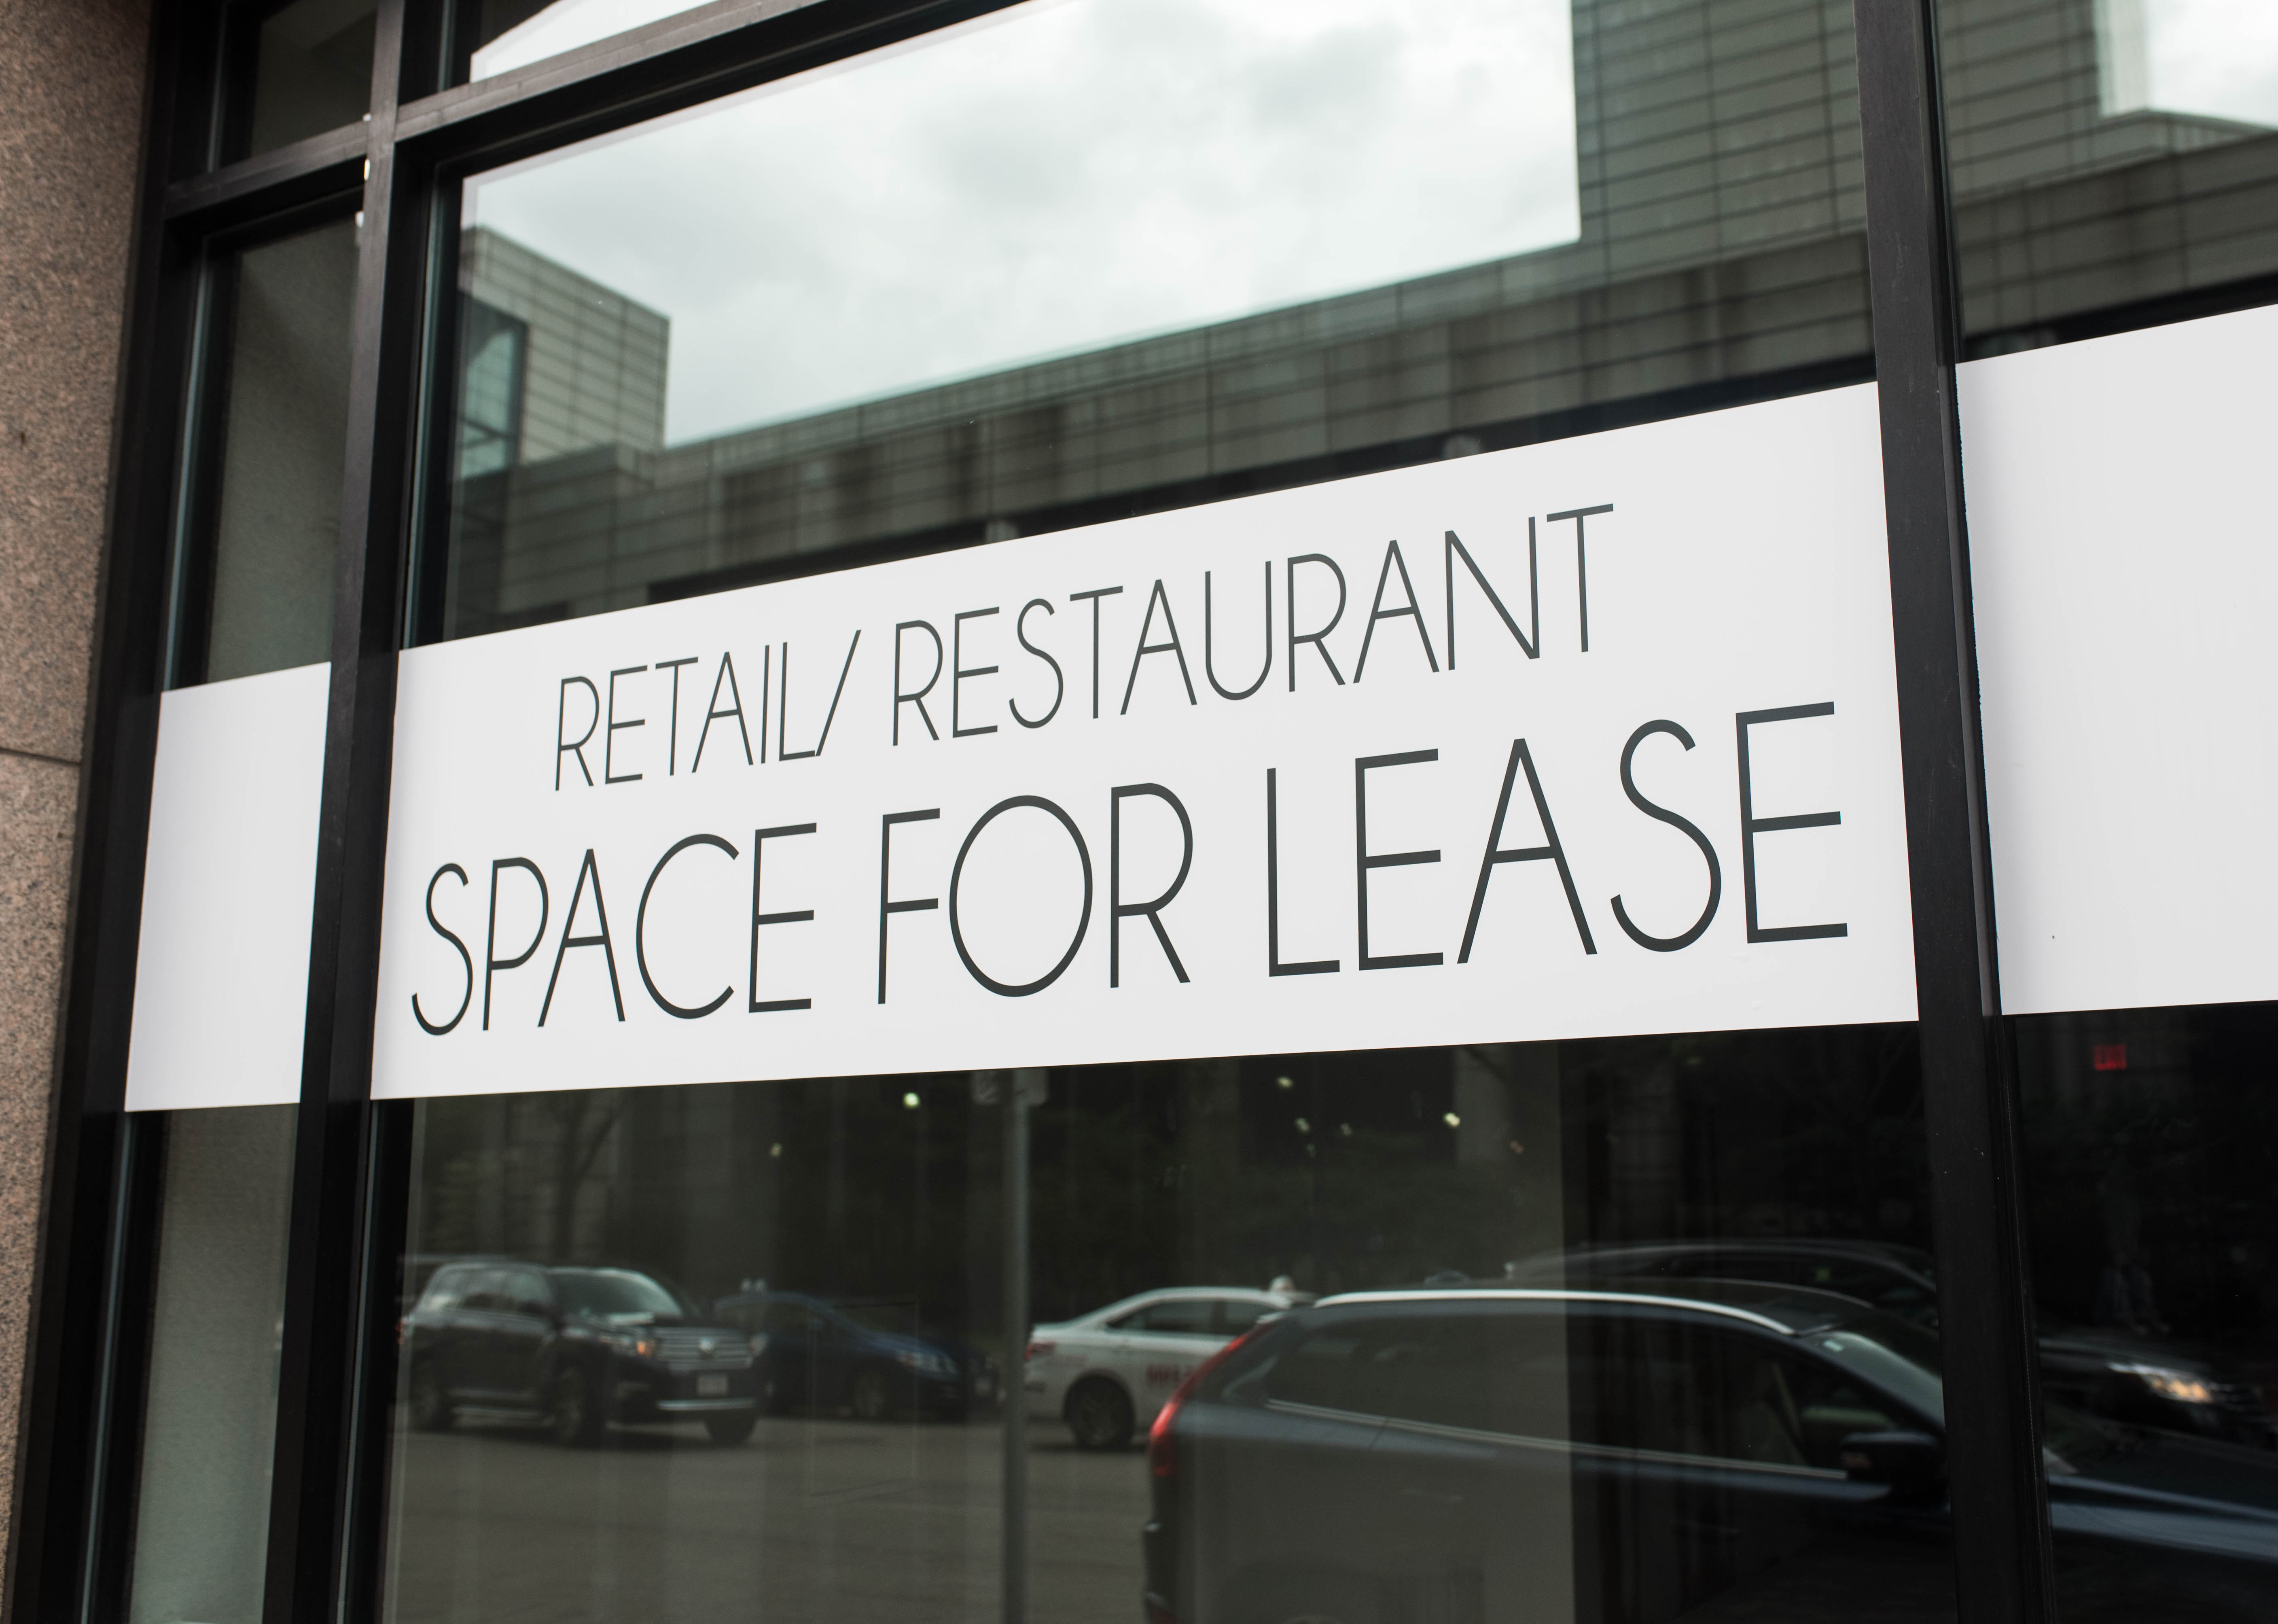 Space for Lease window design 